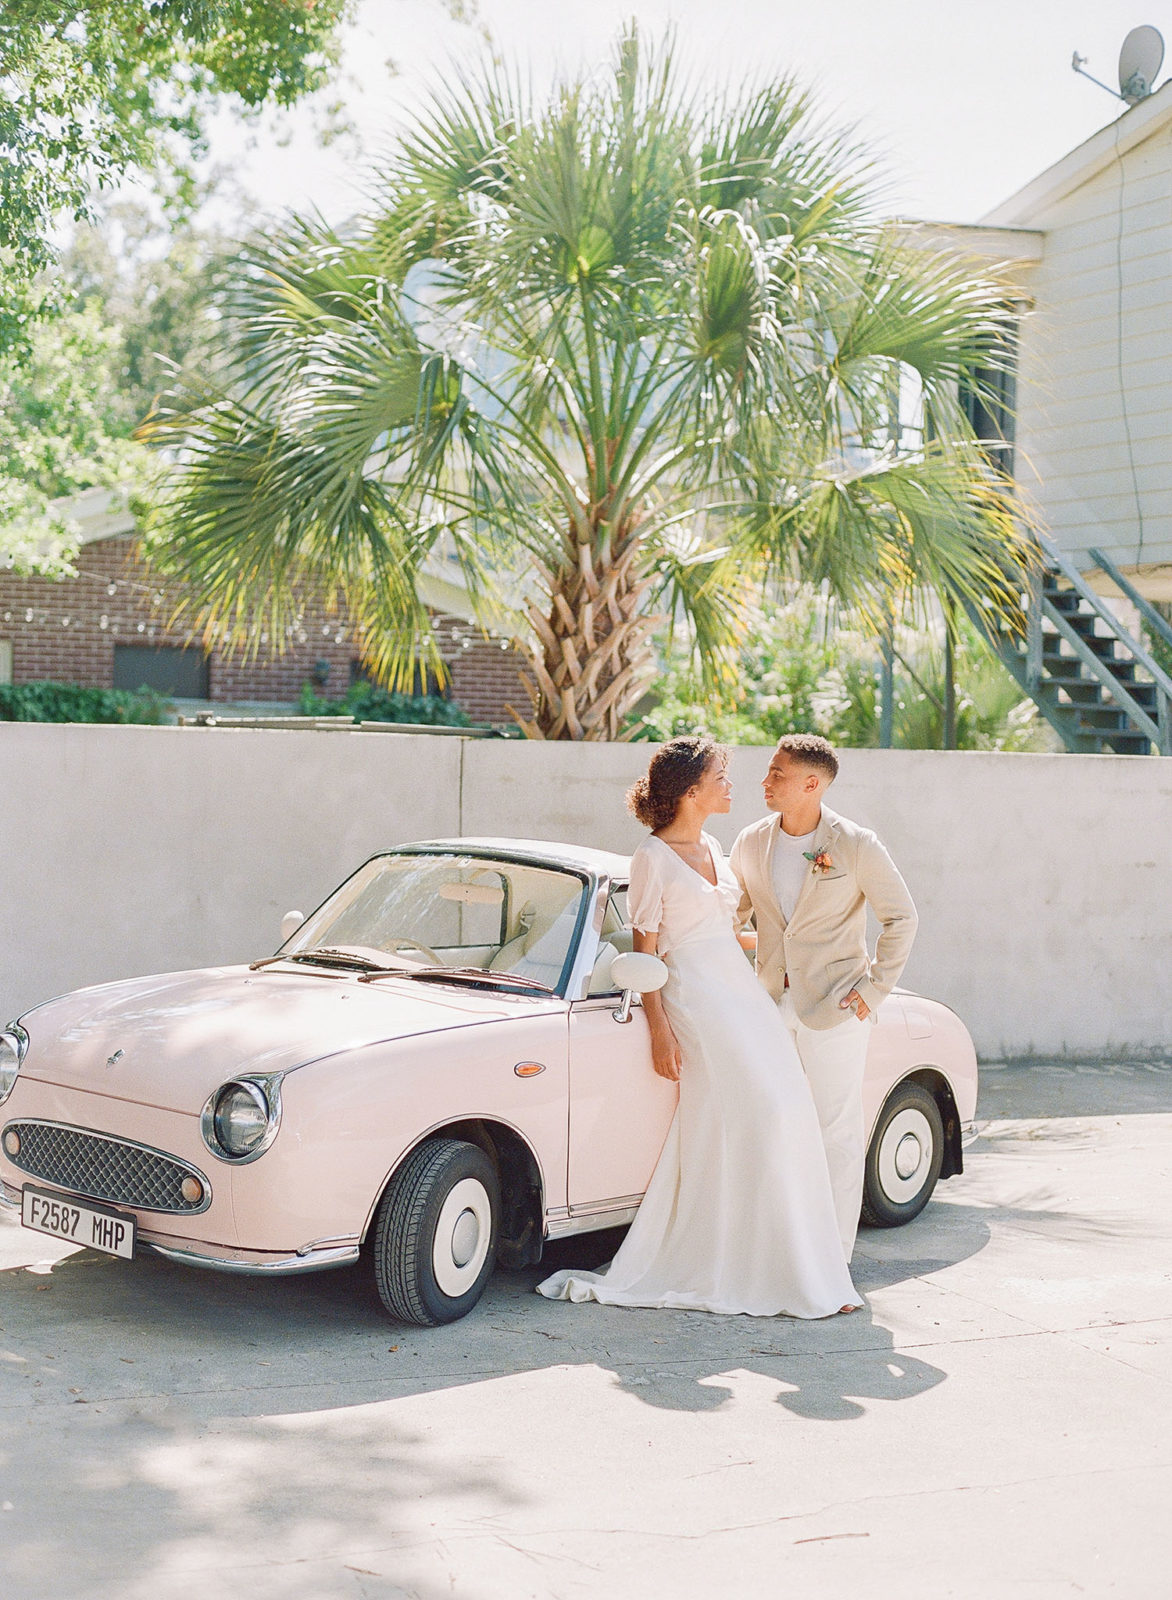 '91 Pink Figaro wedding getaway car for a Charleston wedding captured by Clay Austin and planned by Willow and Oak Events